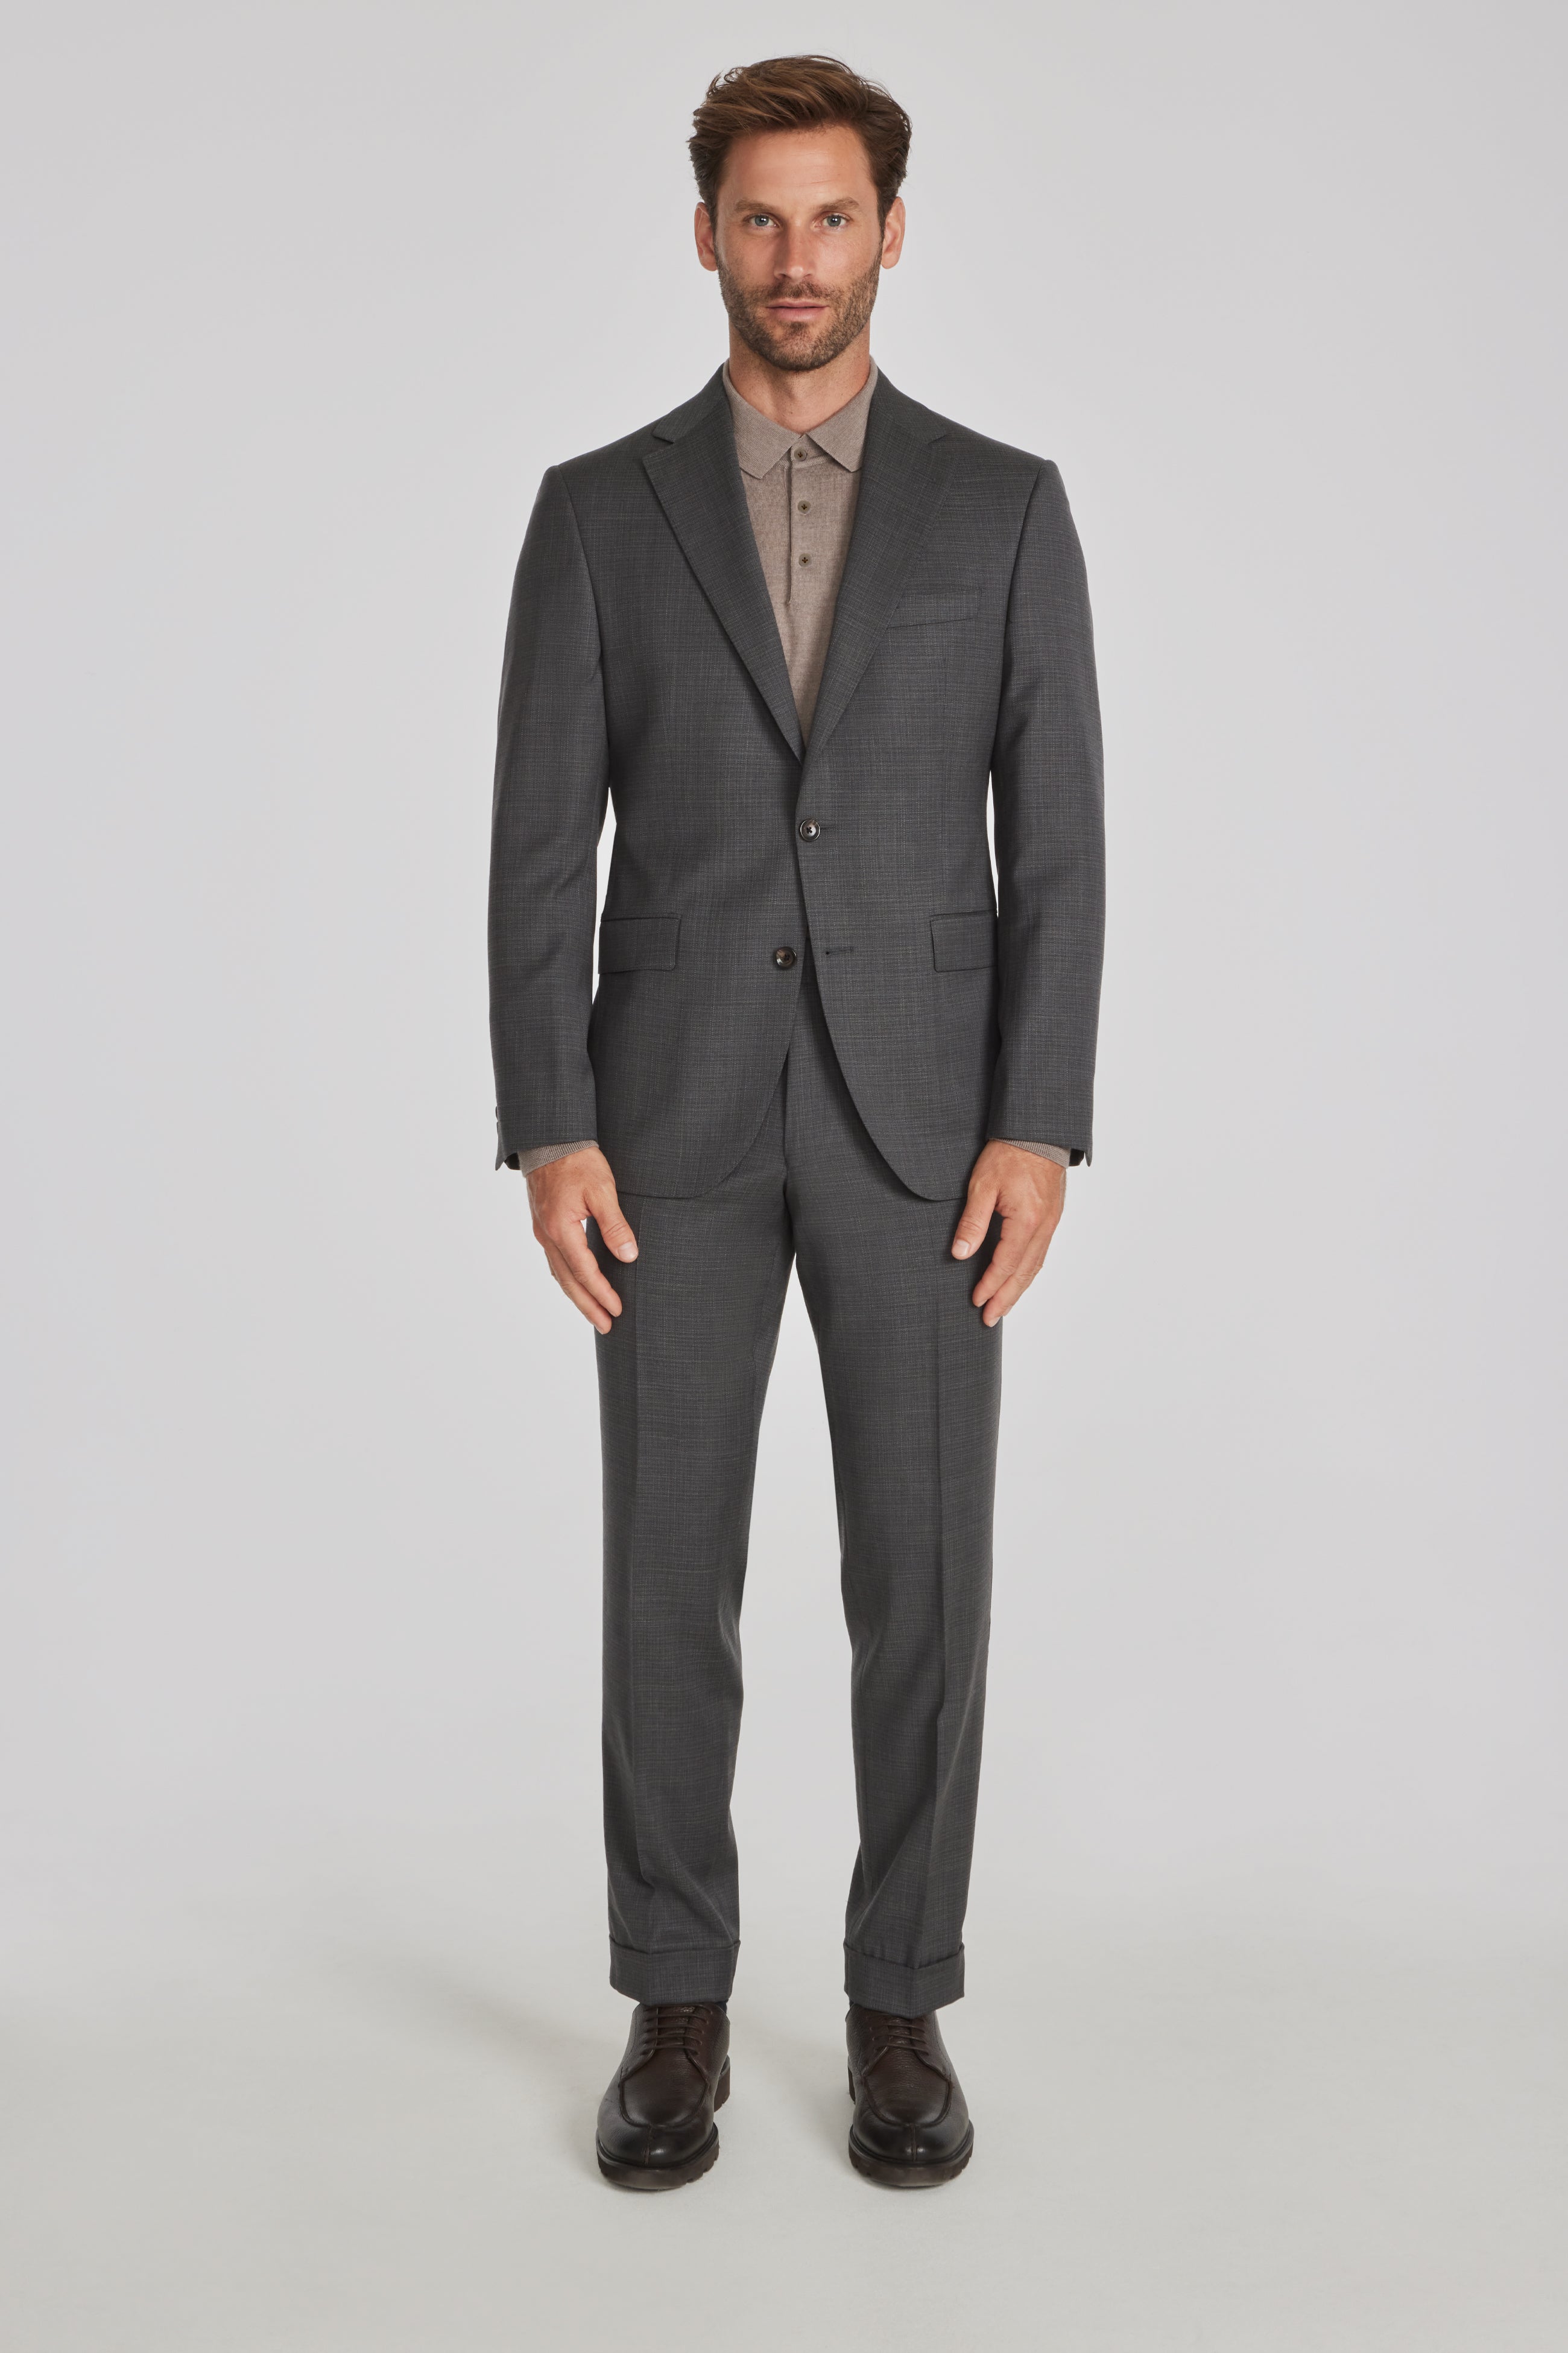 Esprit Charcoal Micro Pattern Super 120's Wool Stretch Suit